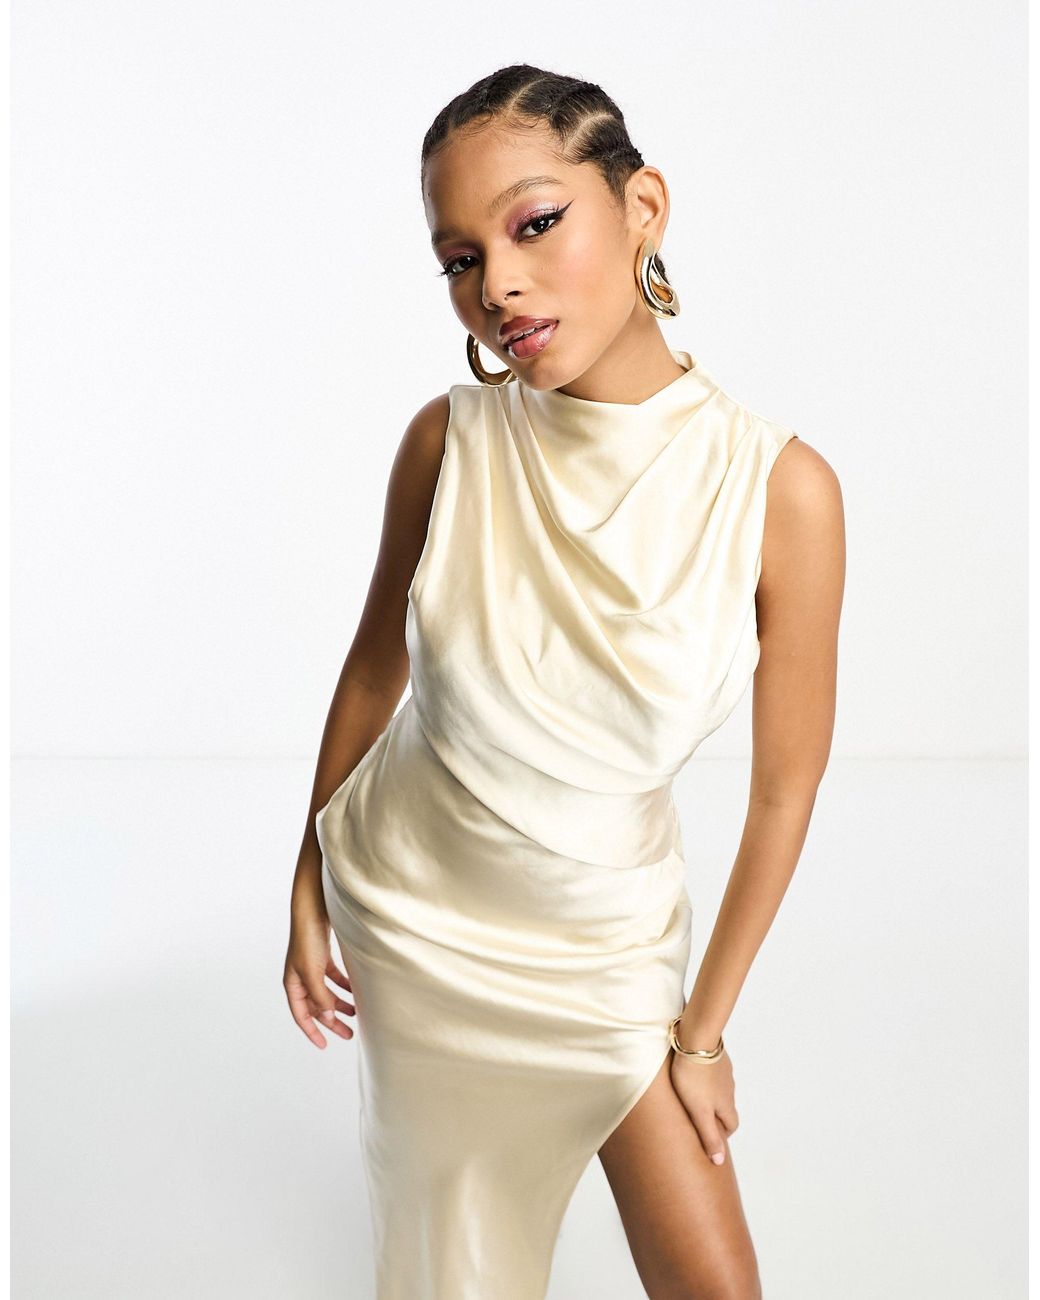 ASOS DESIGN satin high neck drape maxi dress with open back and high split  in champagne